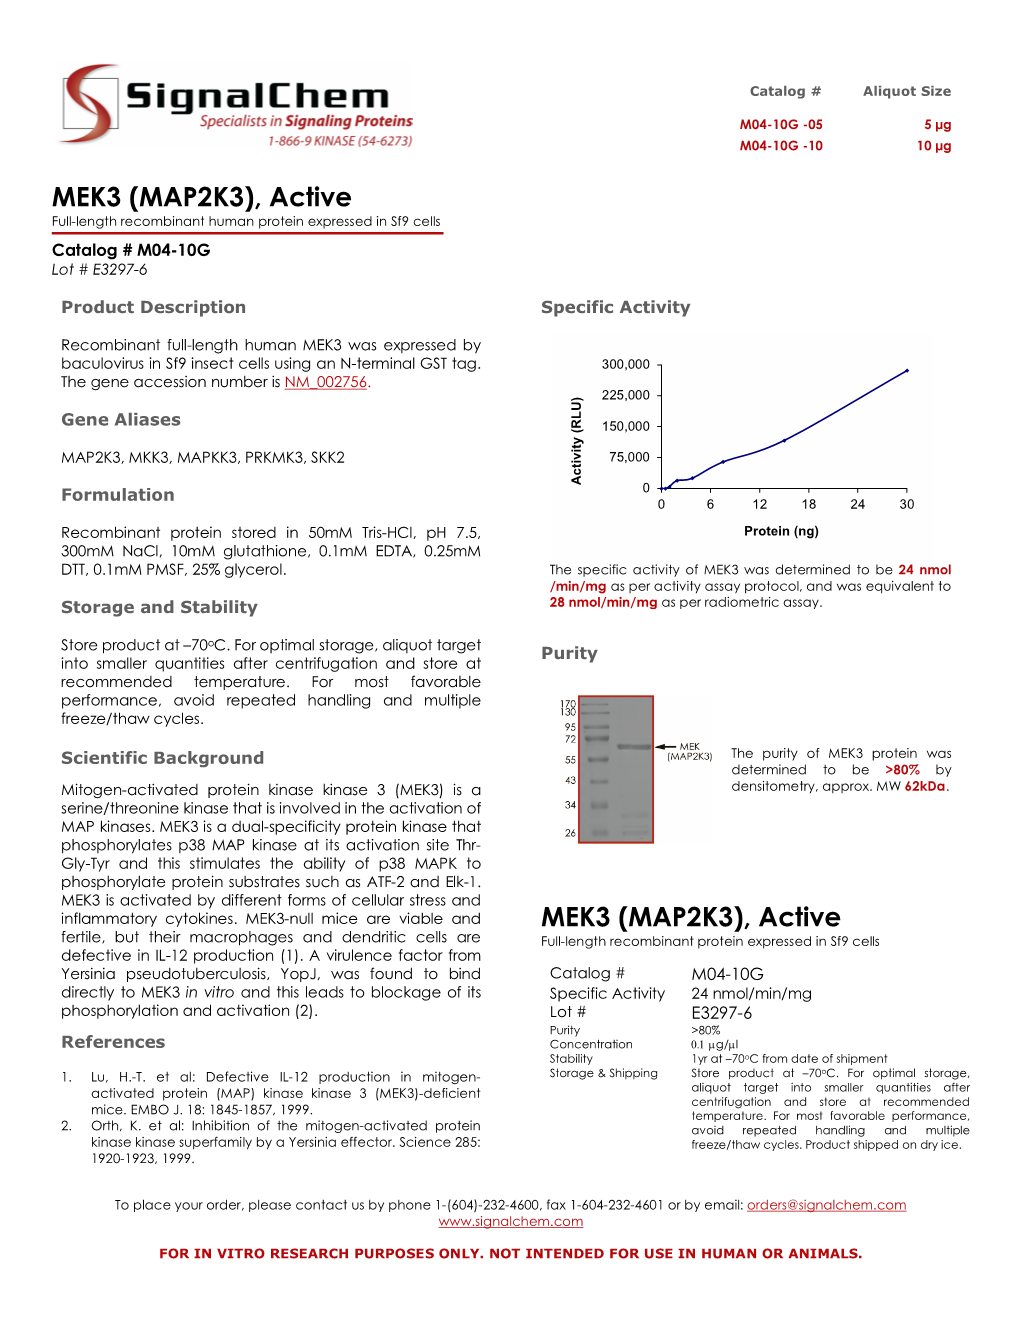 MEK3 (MAP2K3), Active Full-Length Recombinant Human Protein Expressed in Sf9 Cells